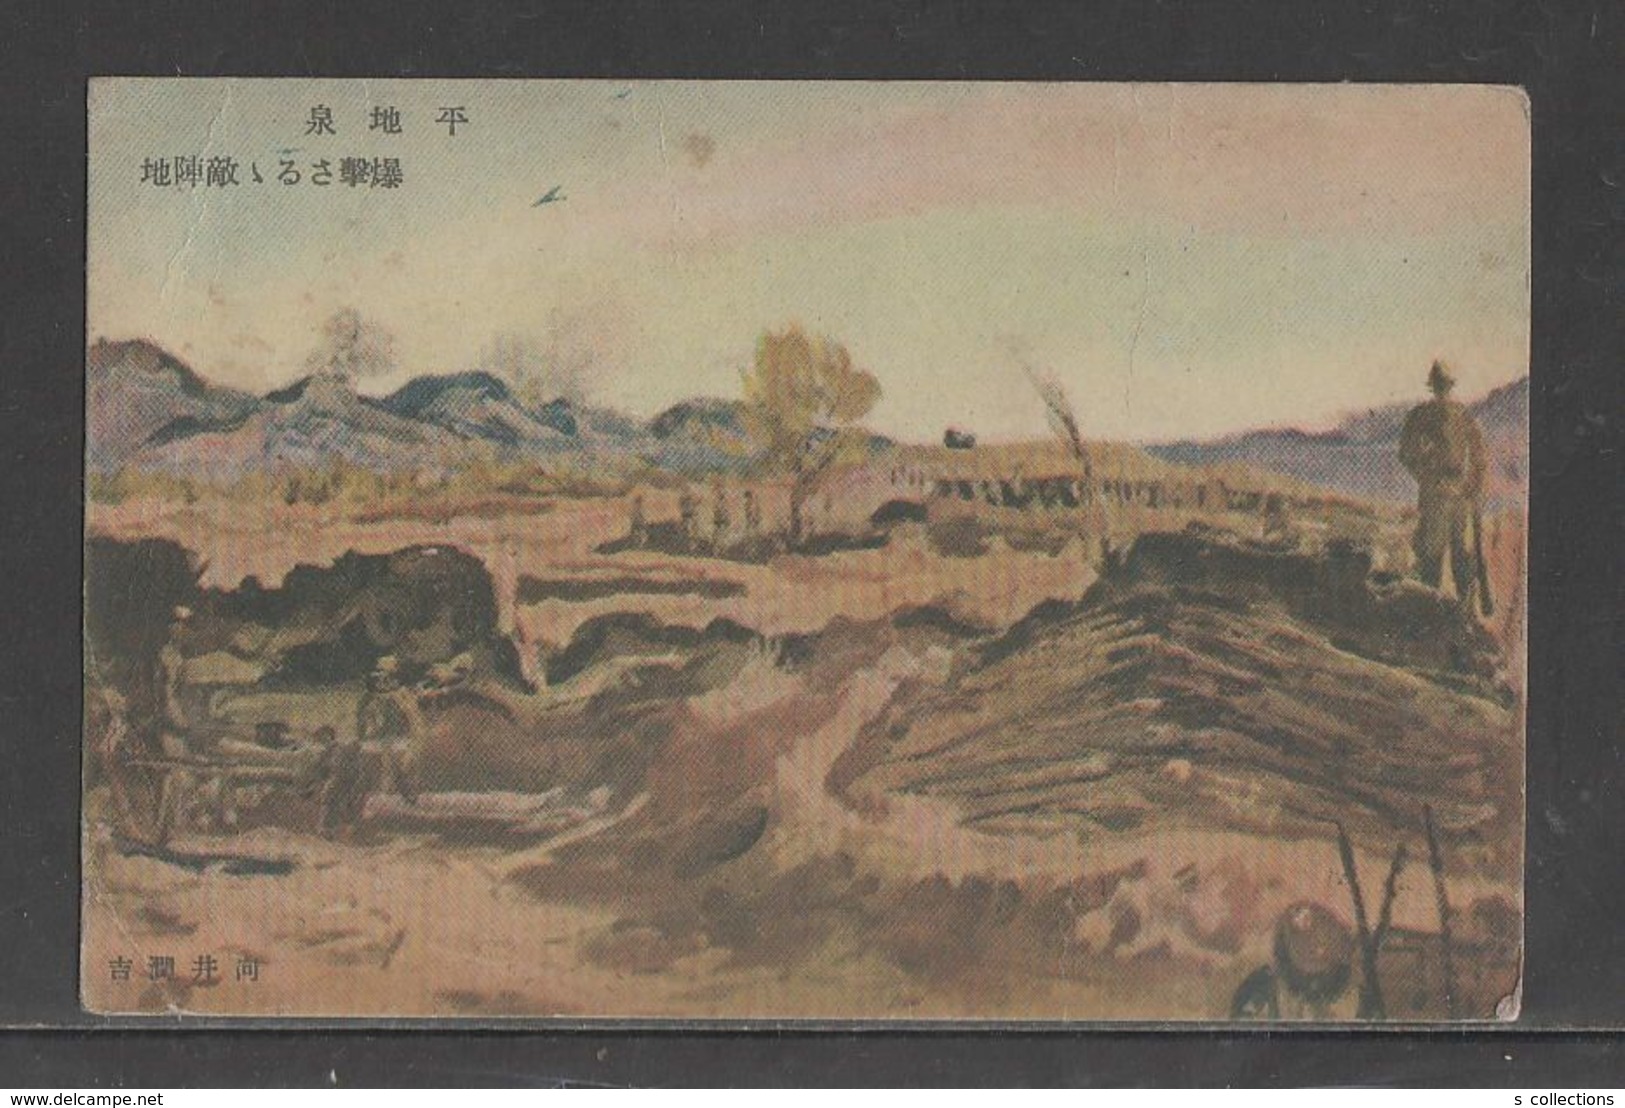 JAPAN WWII Military Pingdiquan Picture Postcard NORTH CHINA CHINE WW2 MANCHURIA CHINE MANDCHOUKOUO JAPON GIAPPONE - 1941-45 Northern China